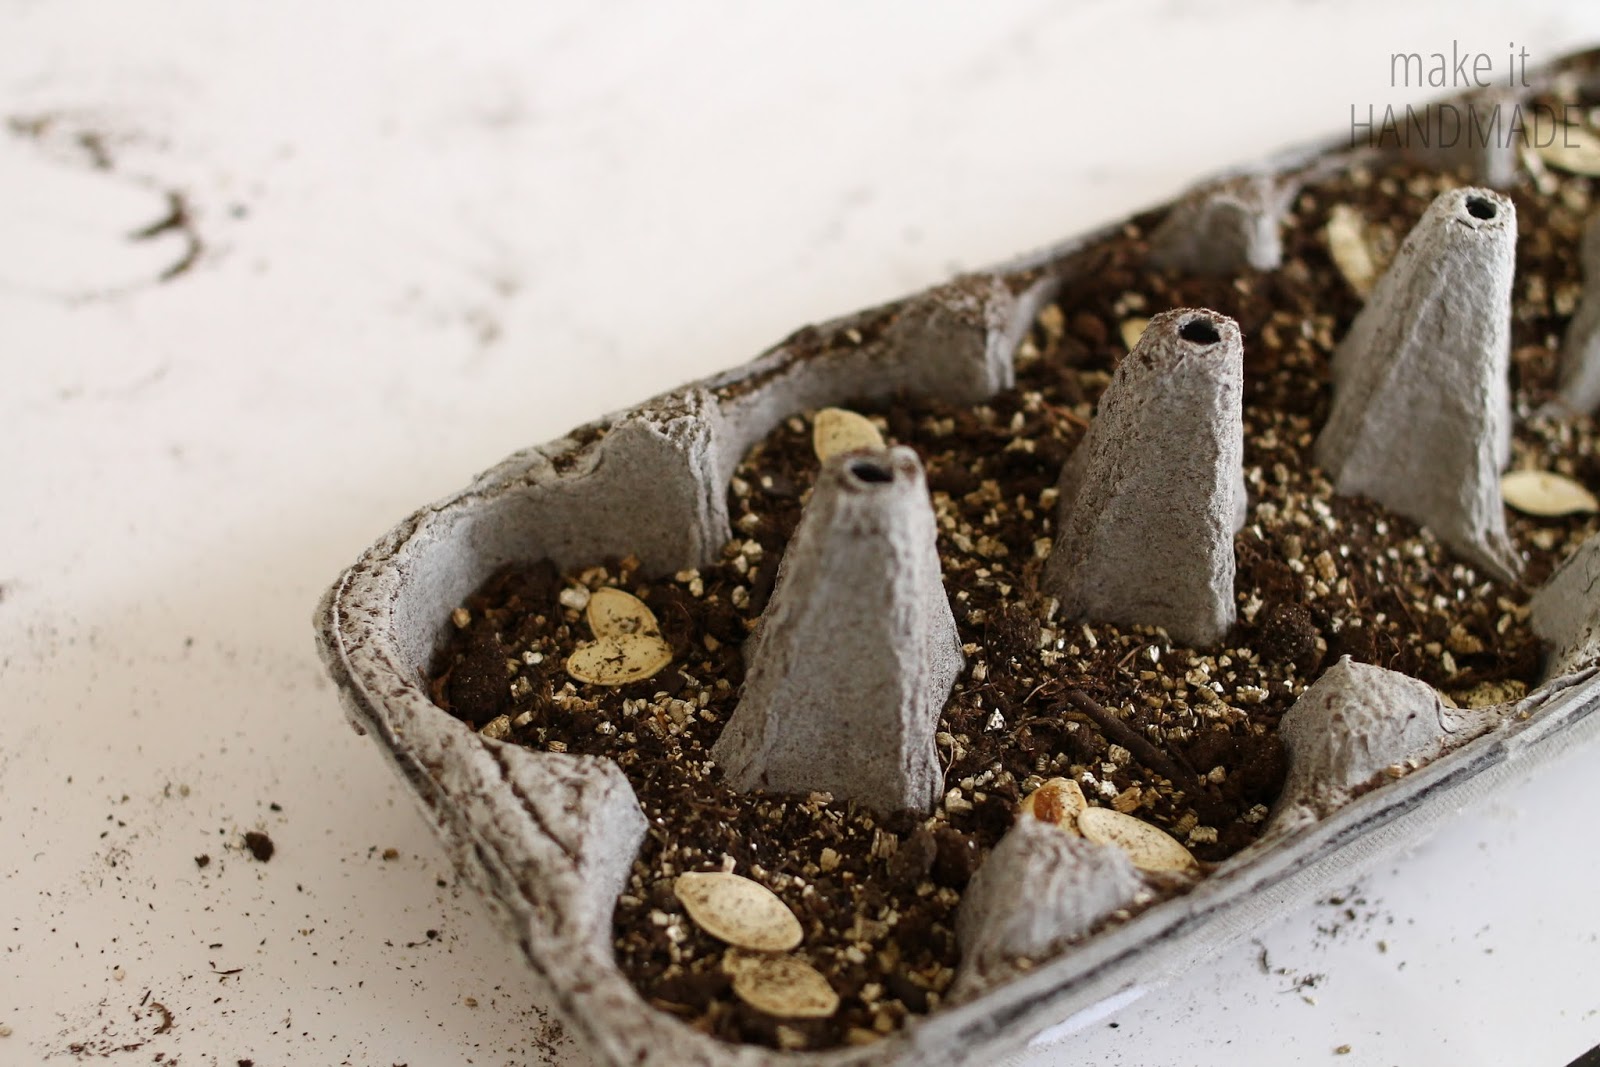 How to start vegetable seeds in egg cartons-- an easy step by step guide. A wonderful gardening project to do with kids of any age. from http://www.makeithandmade.com/2014/02/starting-seeds-in-egg-cartons.html 